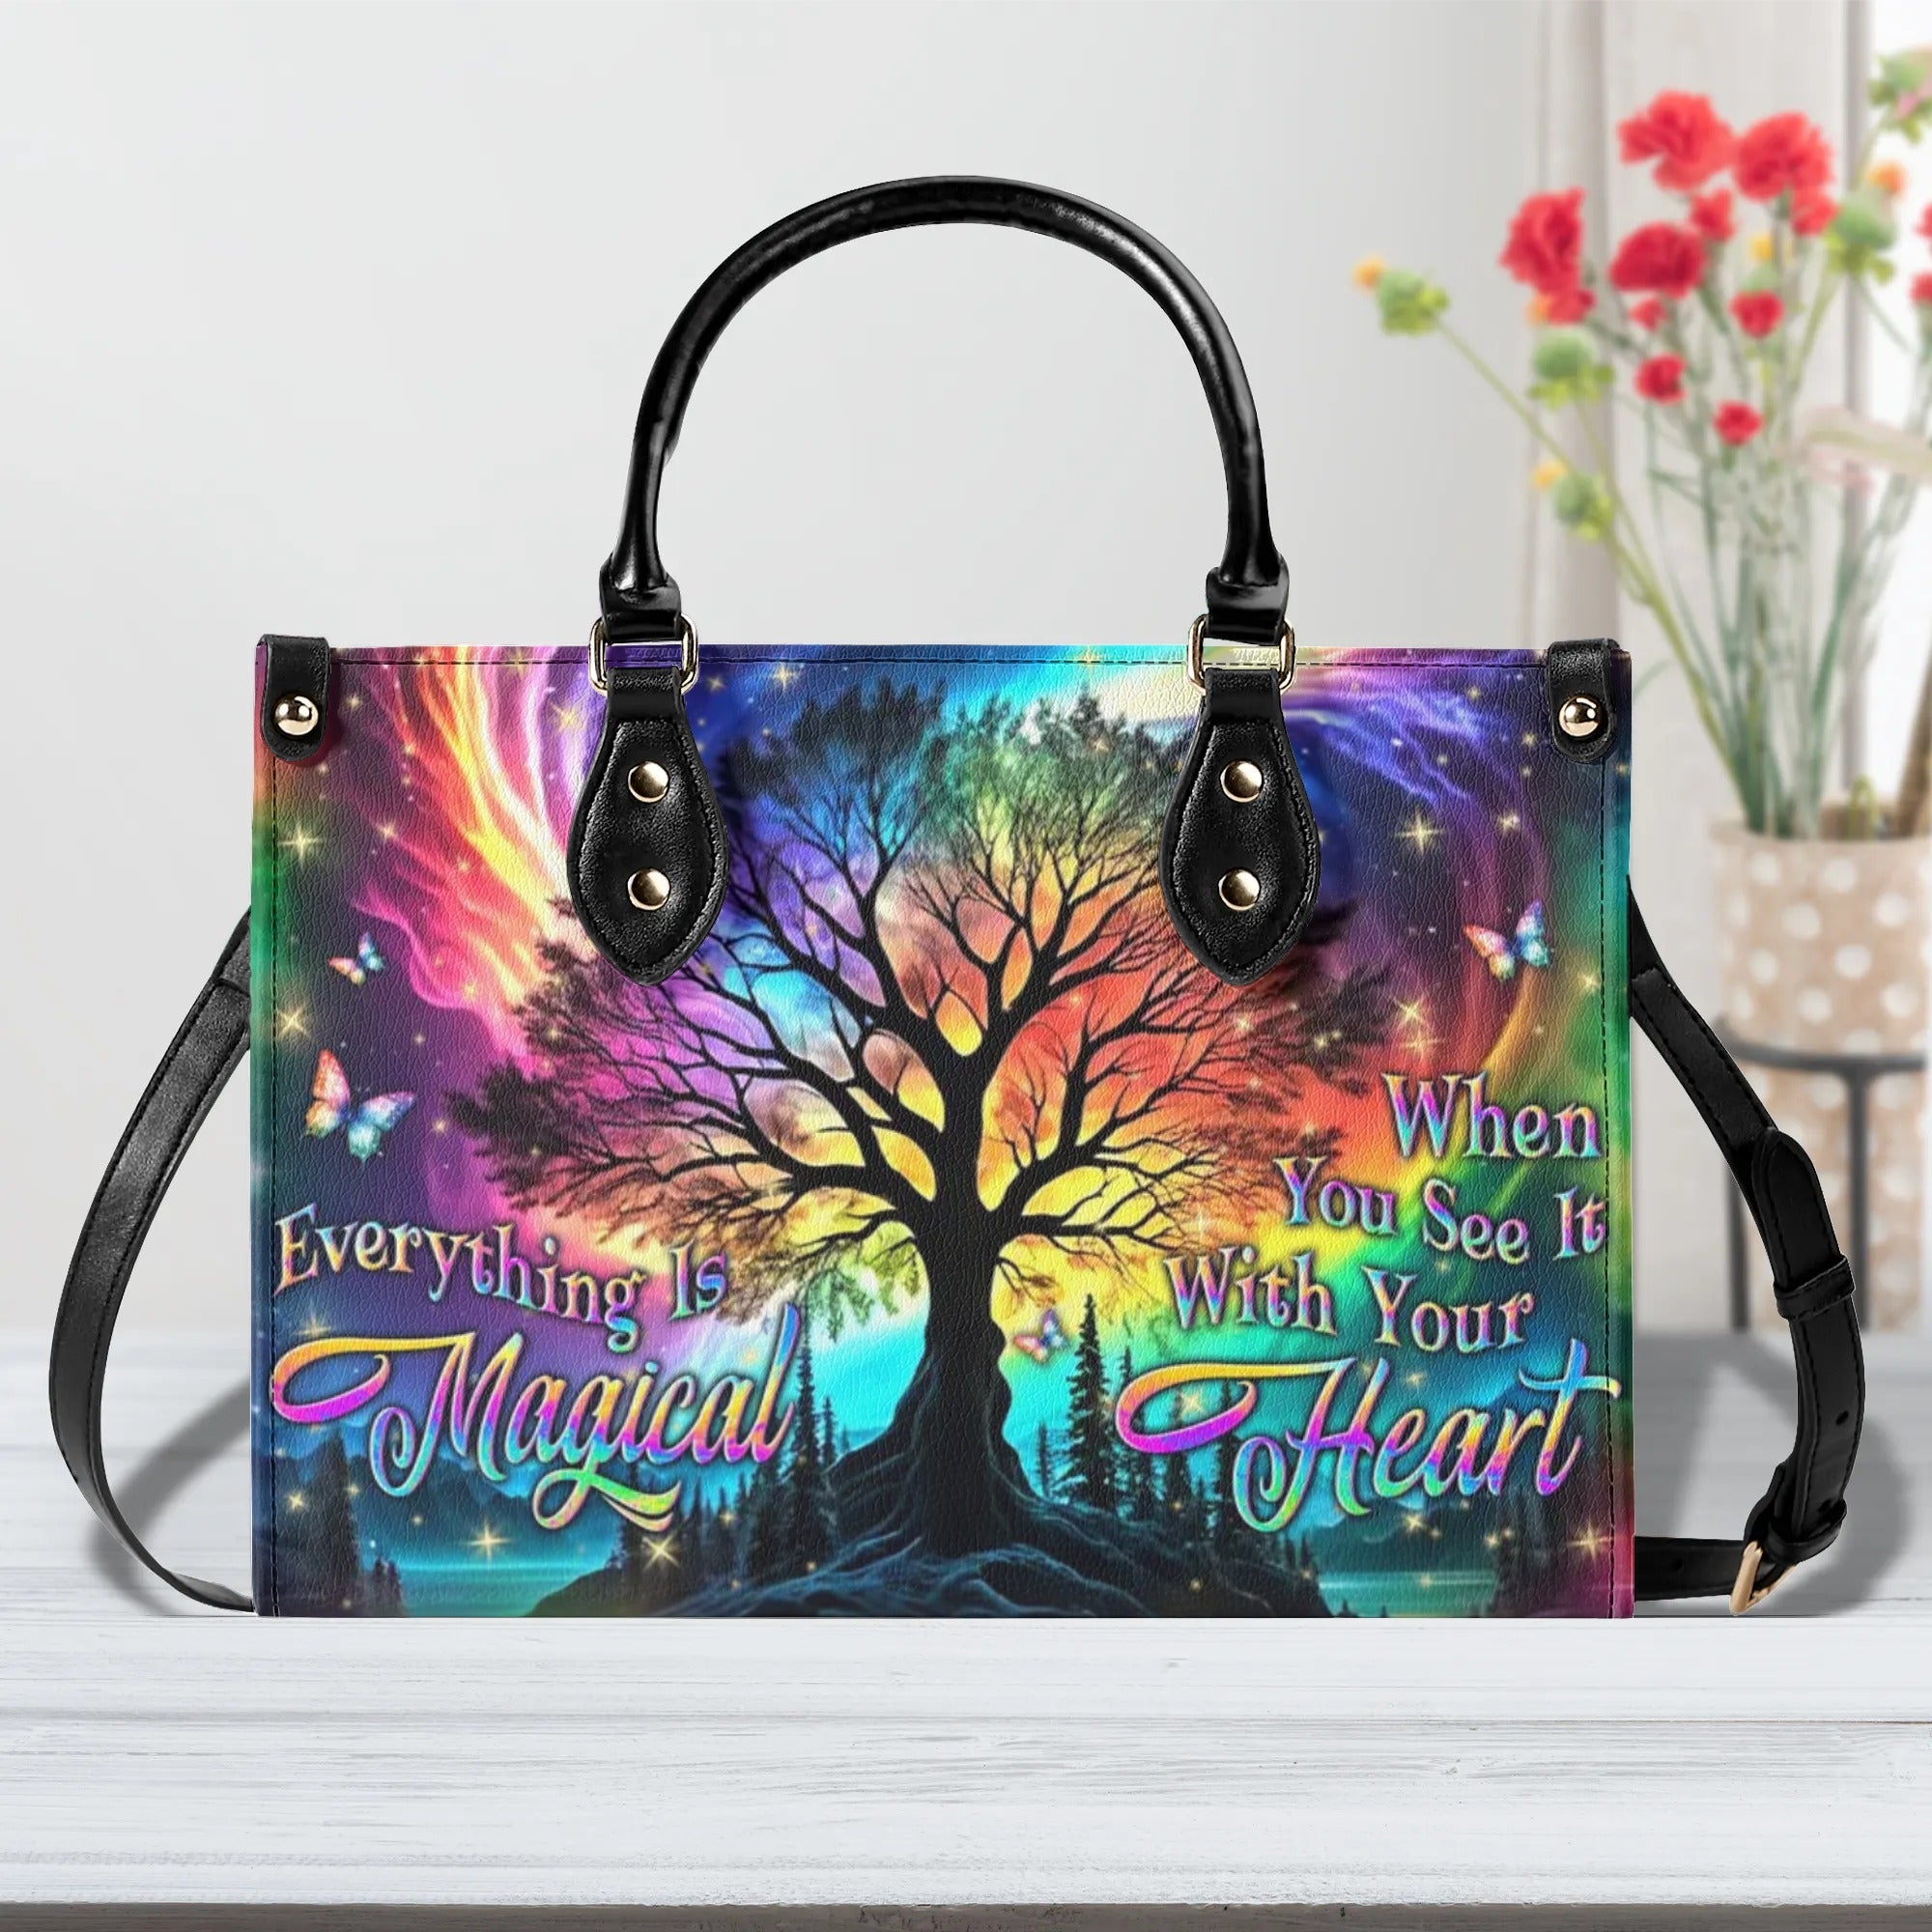 EVERYTHING IS MAGICAL LEATHER HANDBAG - YHLN0506244